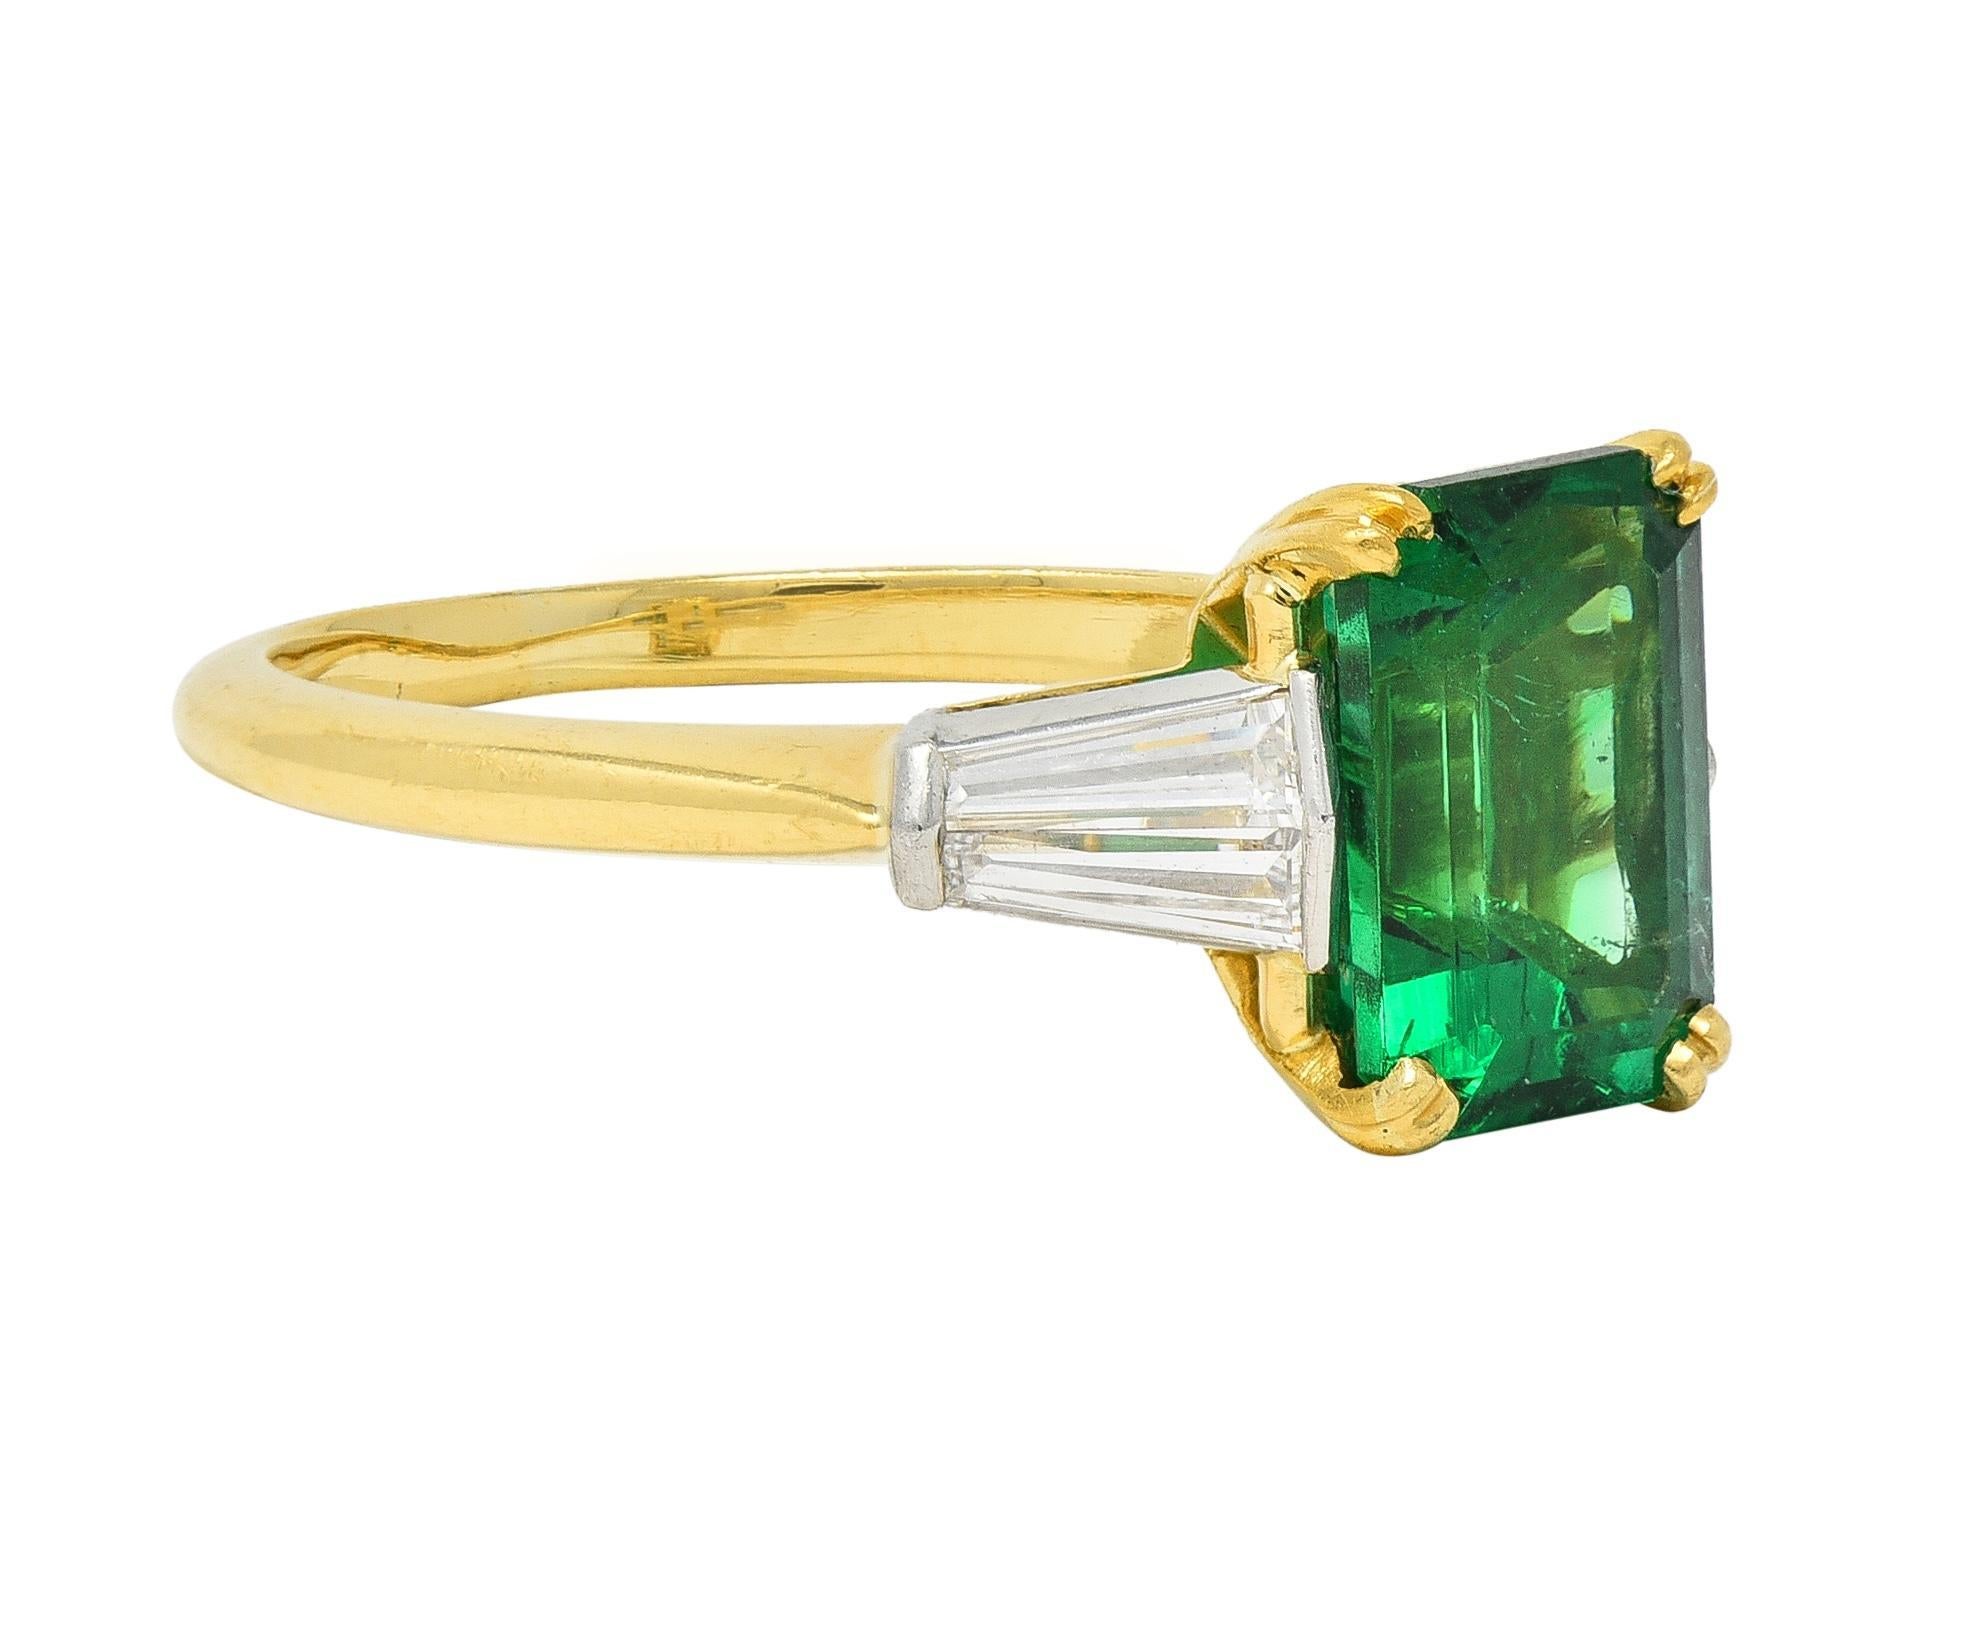 Centering an emerald cut emerald weighing approximately 2.55 carats - transparent medium green
Natural Zambian in origin with minor to insignificant traditional clarity enhancement
Set with split talon prongs in a gold basket and flanked by